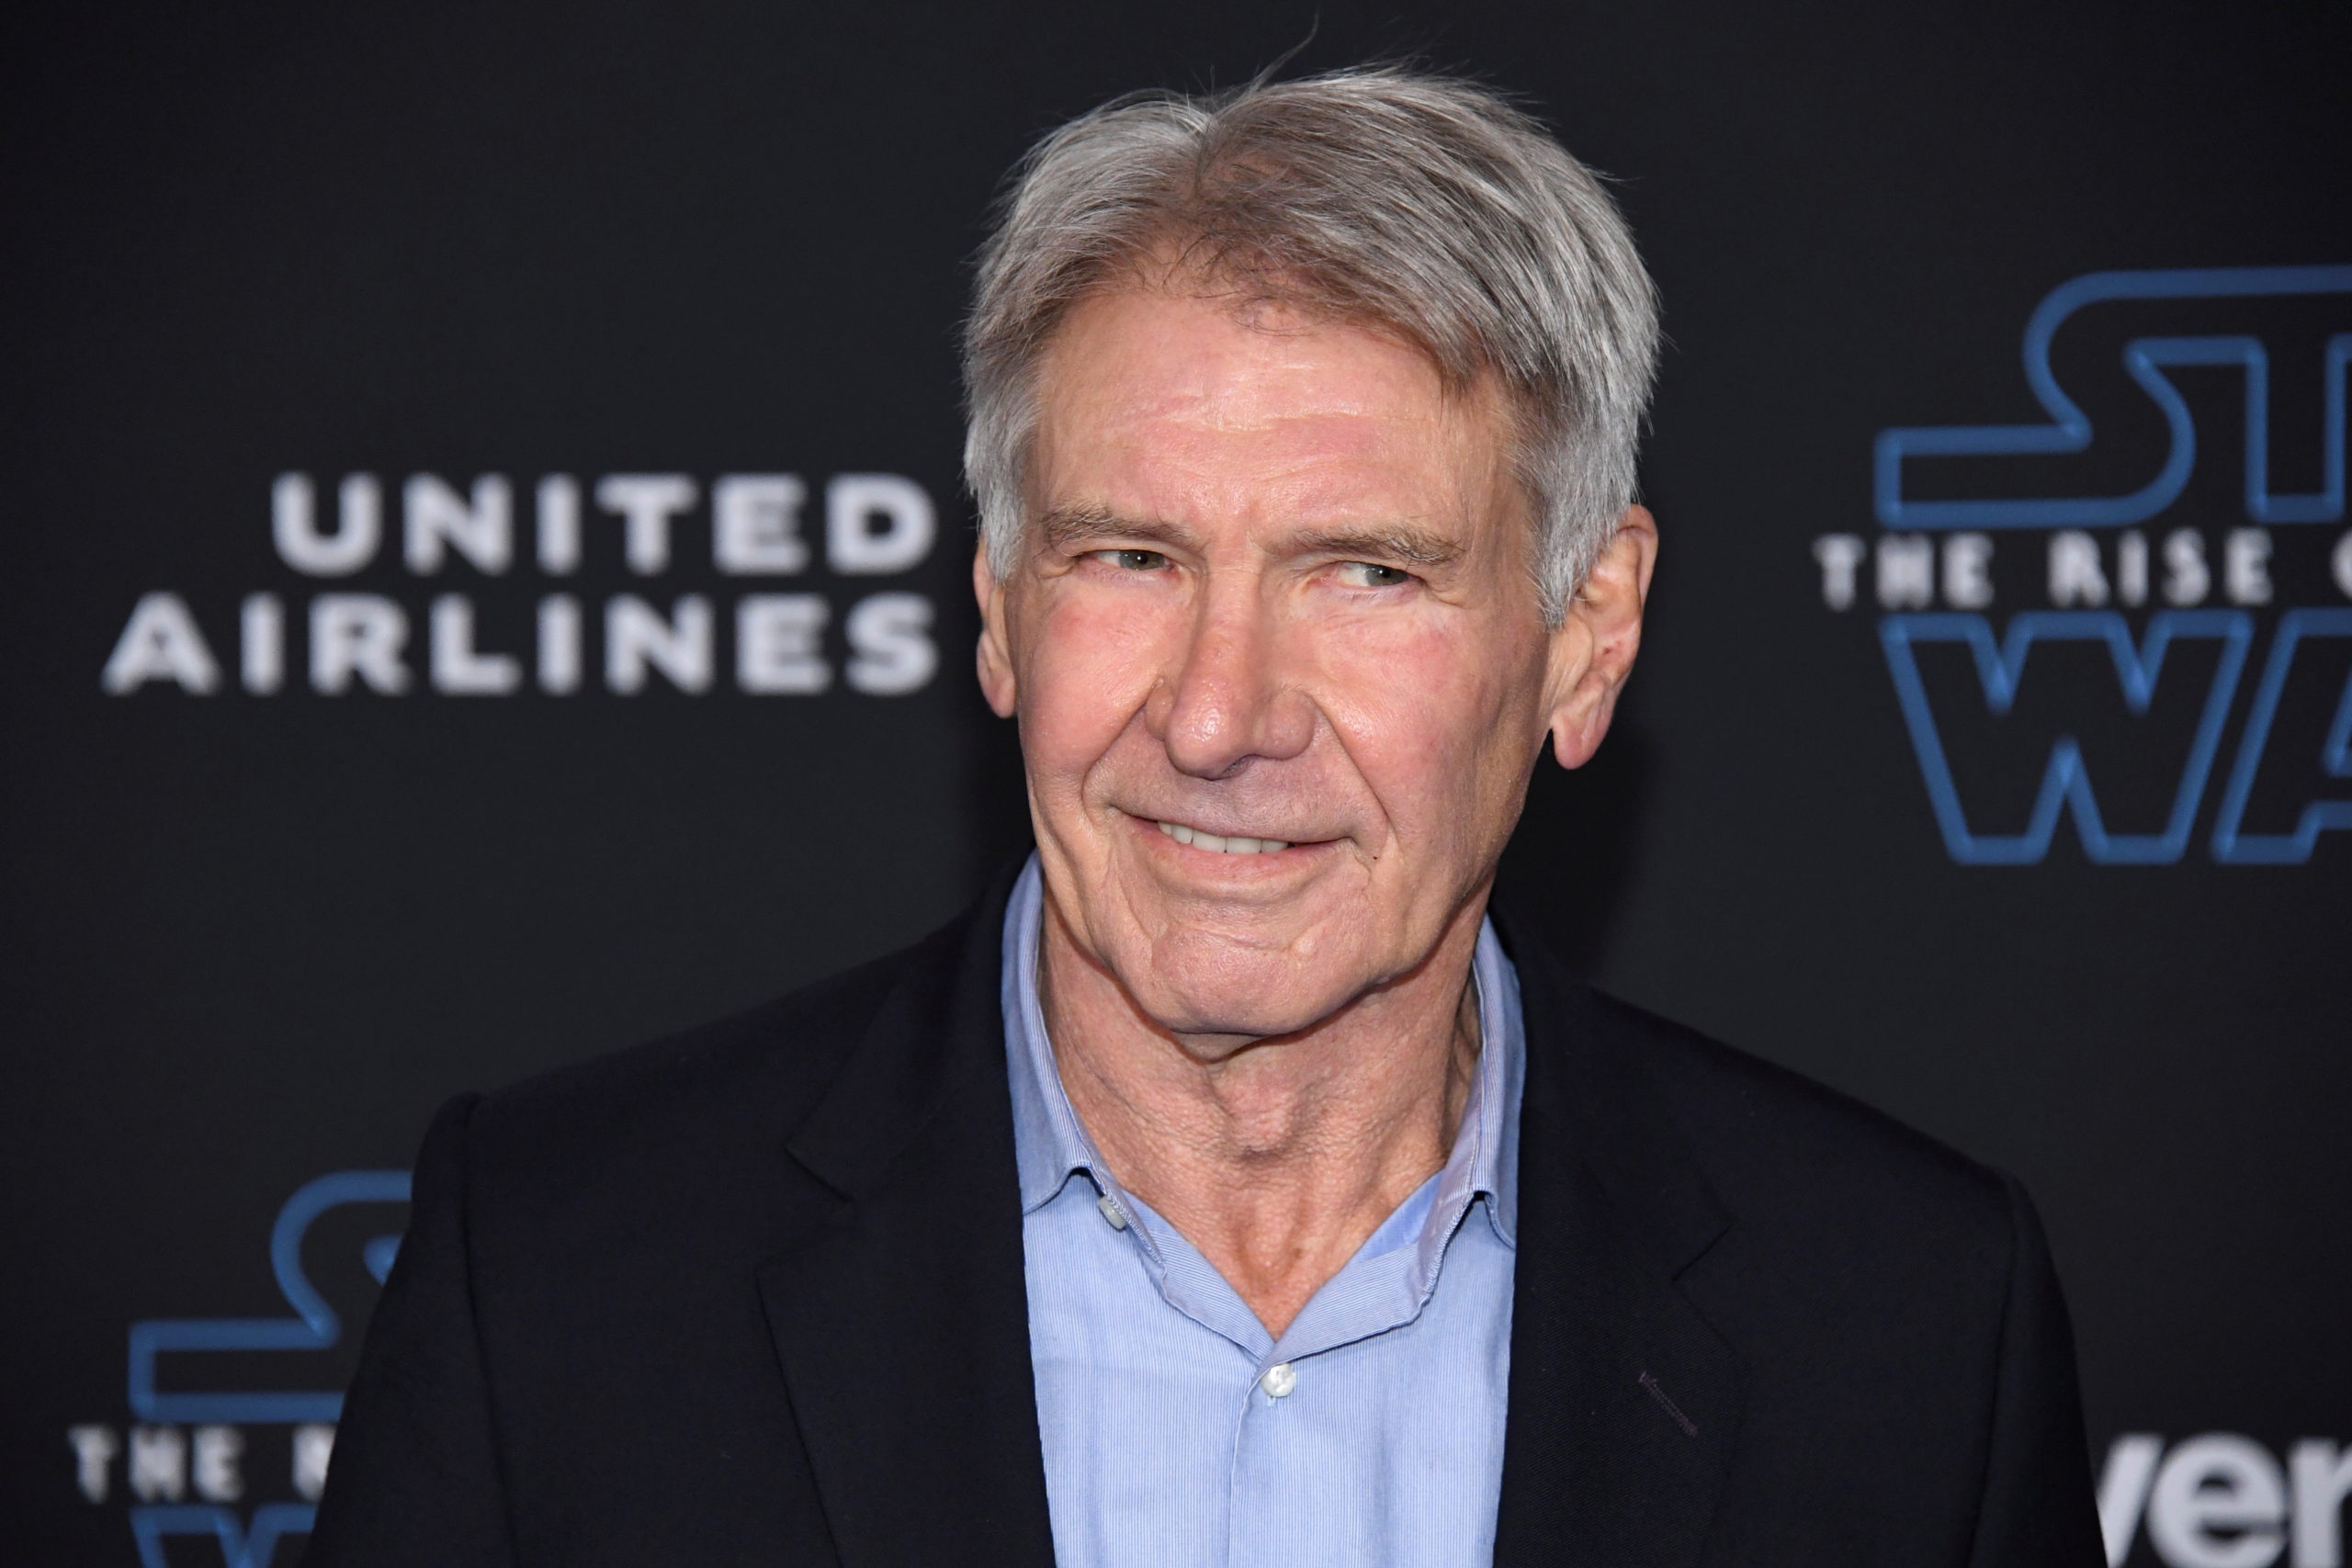 Harrison Ford attends the premiere of "Star Wars: The Rise of Skywalker" in Los Angeles, California, U.S. December 16, 2019. REUTERS/Phil McCarten